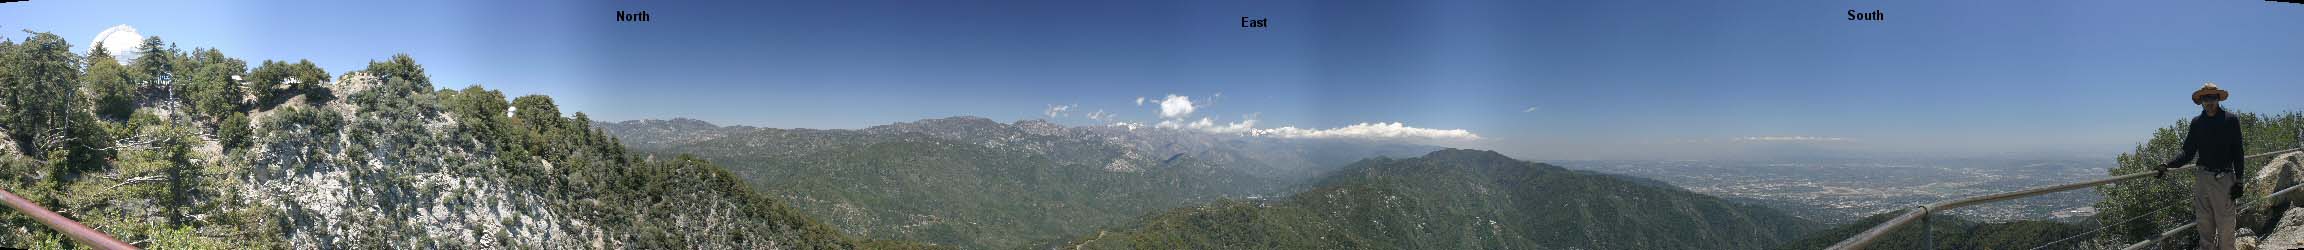 This panorama was captured from Echo Rock on Mount Wilson. Note the improved atmospheric visibility over urban areas when compared to the image capured from same location on 2005-04-26